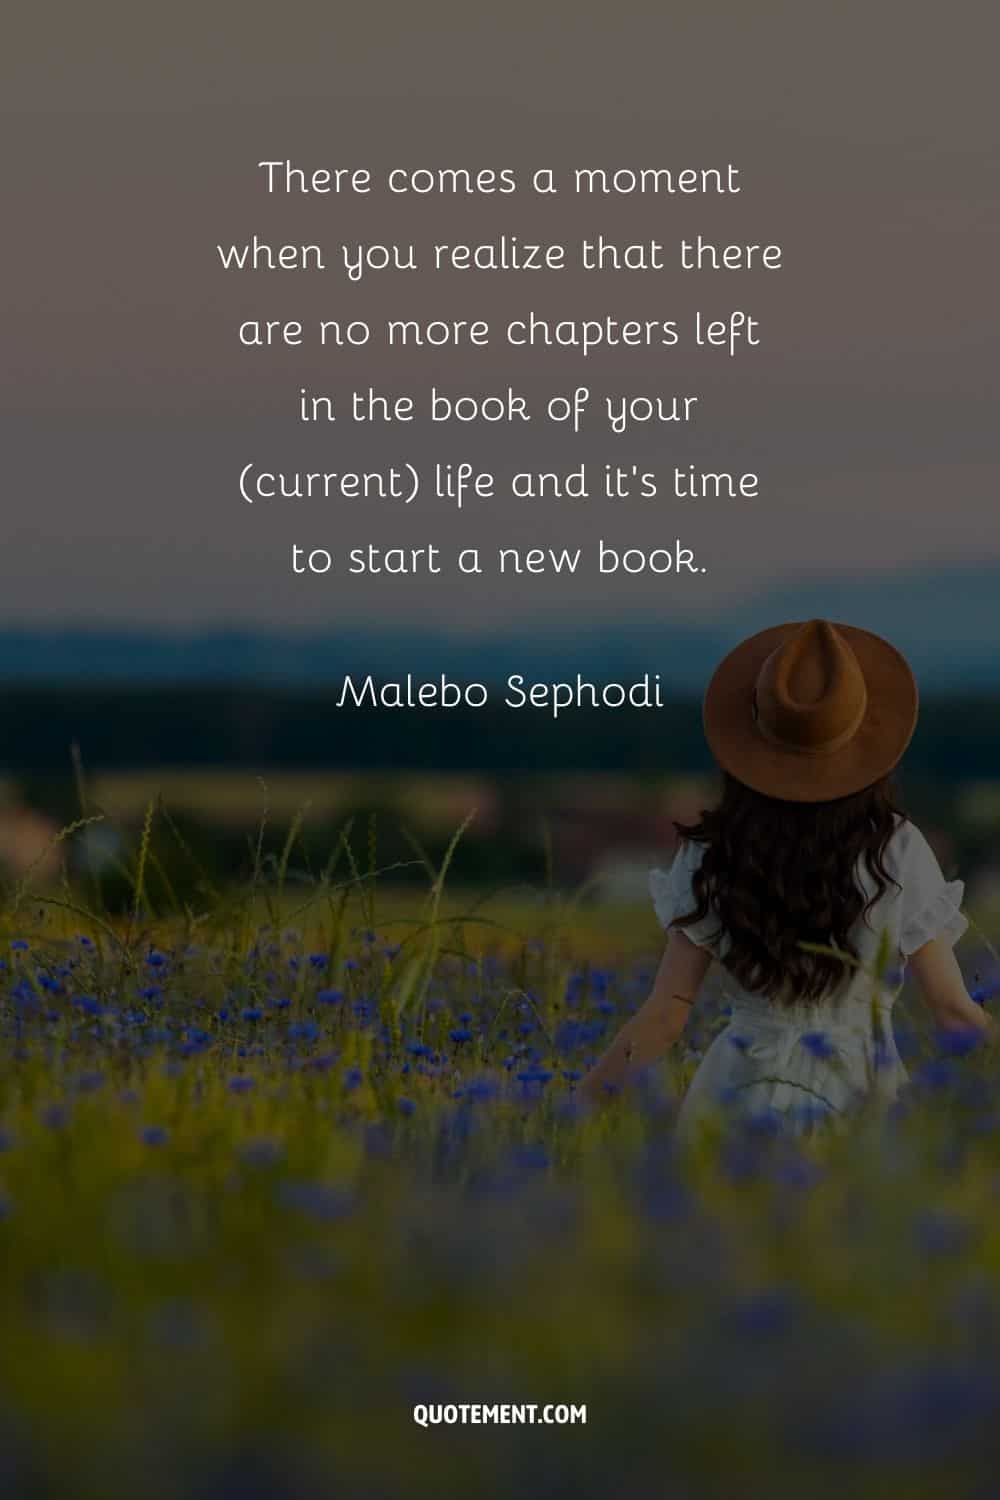 “There comes a moment when you realize that there are no more chapters left in the book of your (current) life and it’s time to start a new book.” — Malebo Sephodi